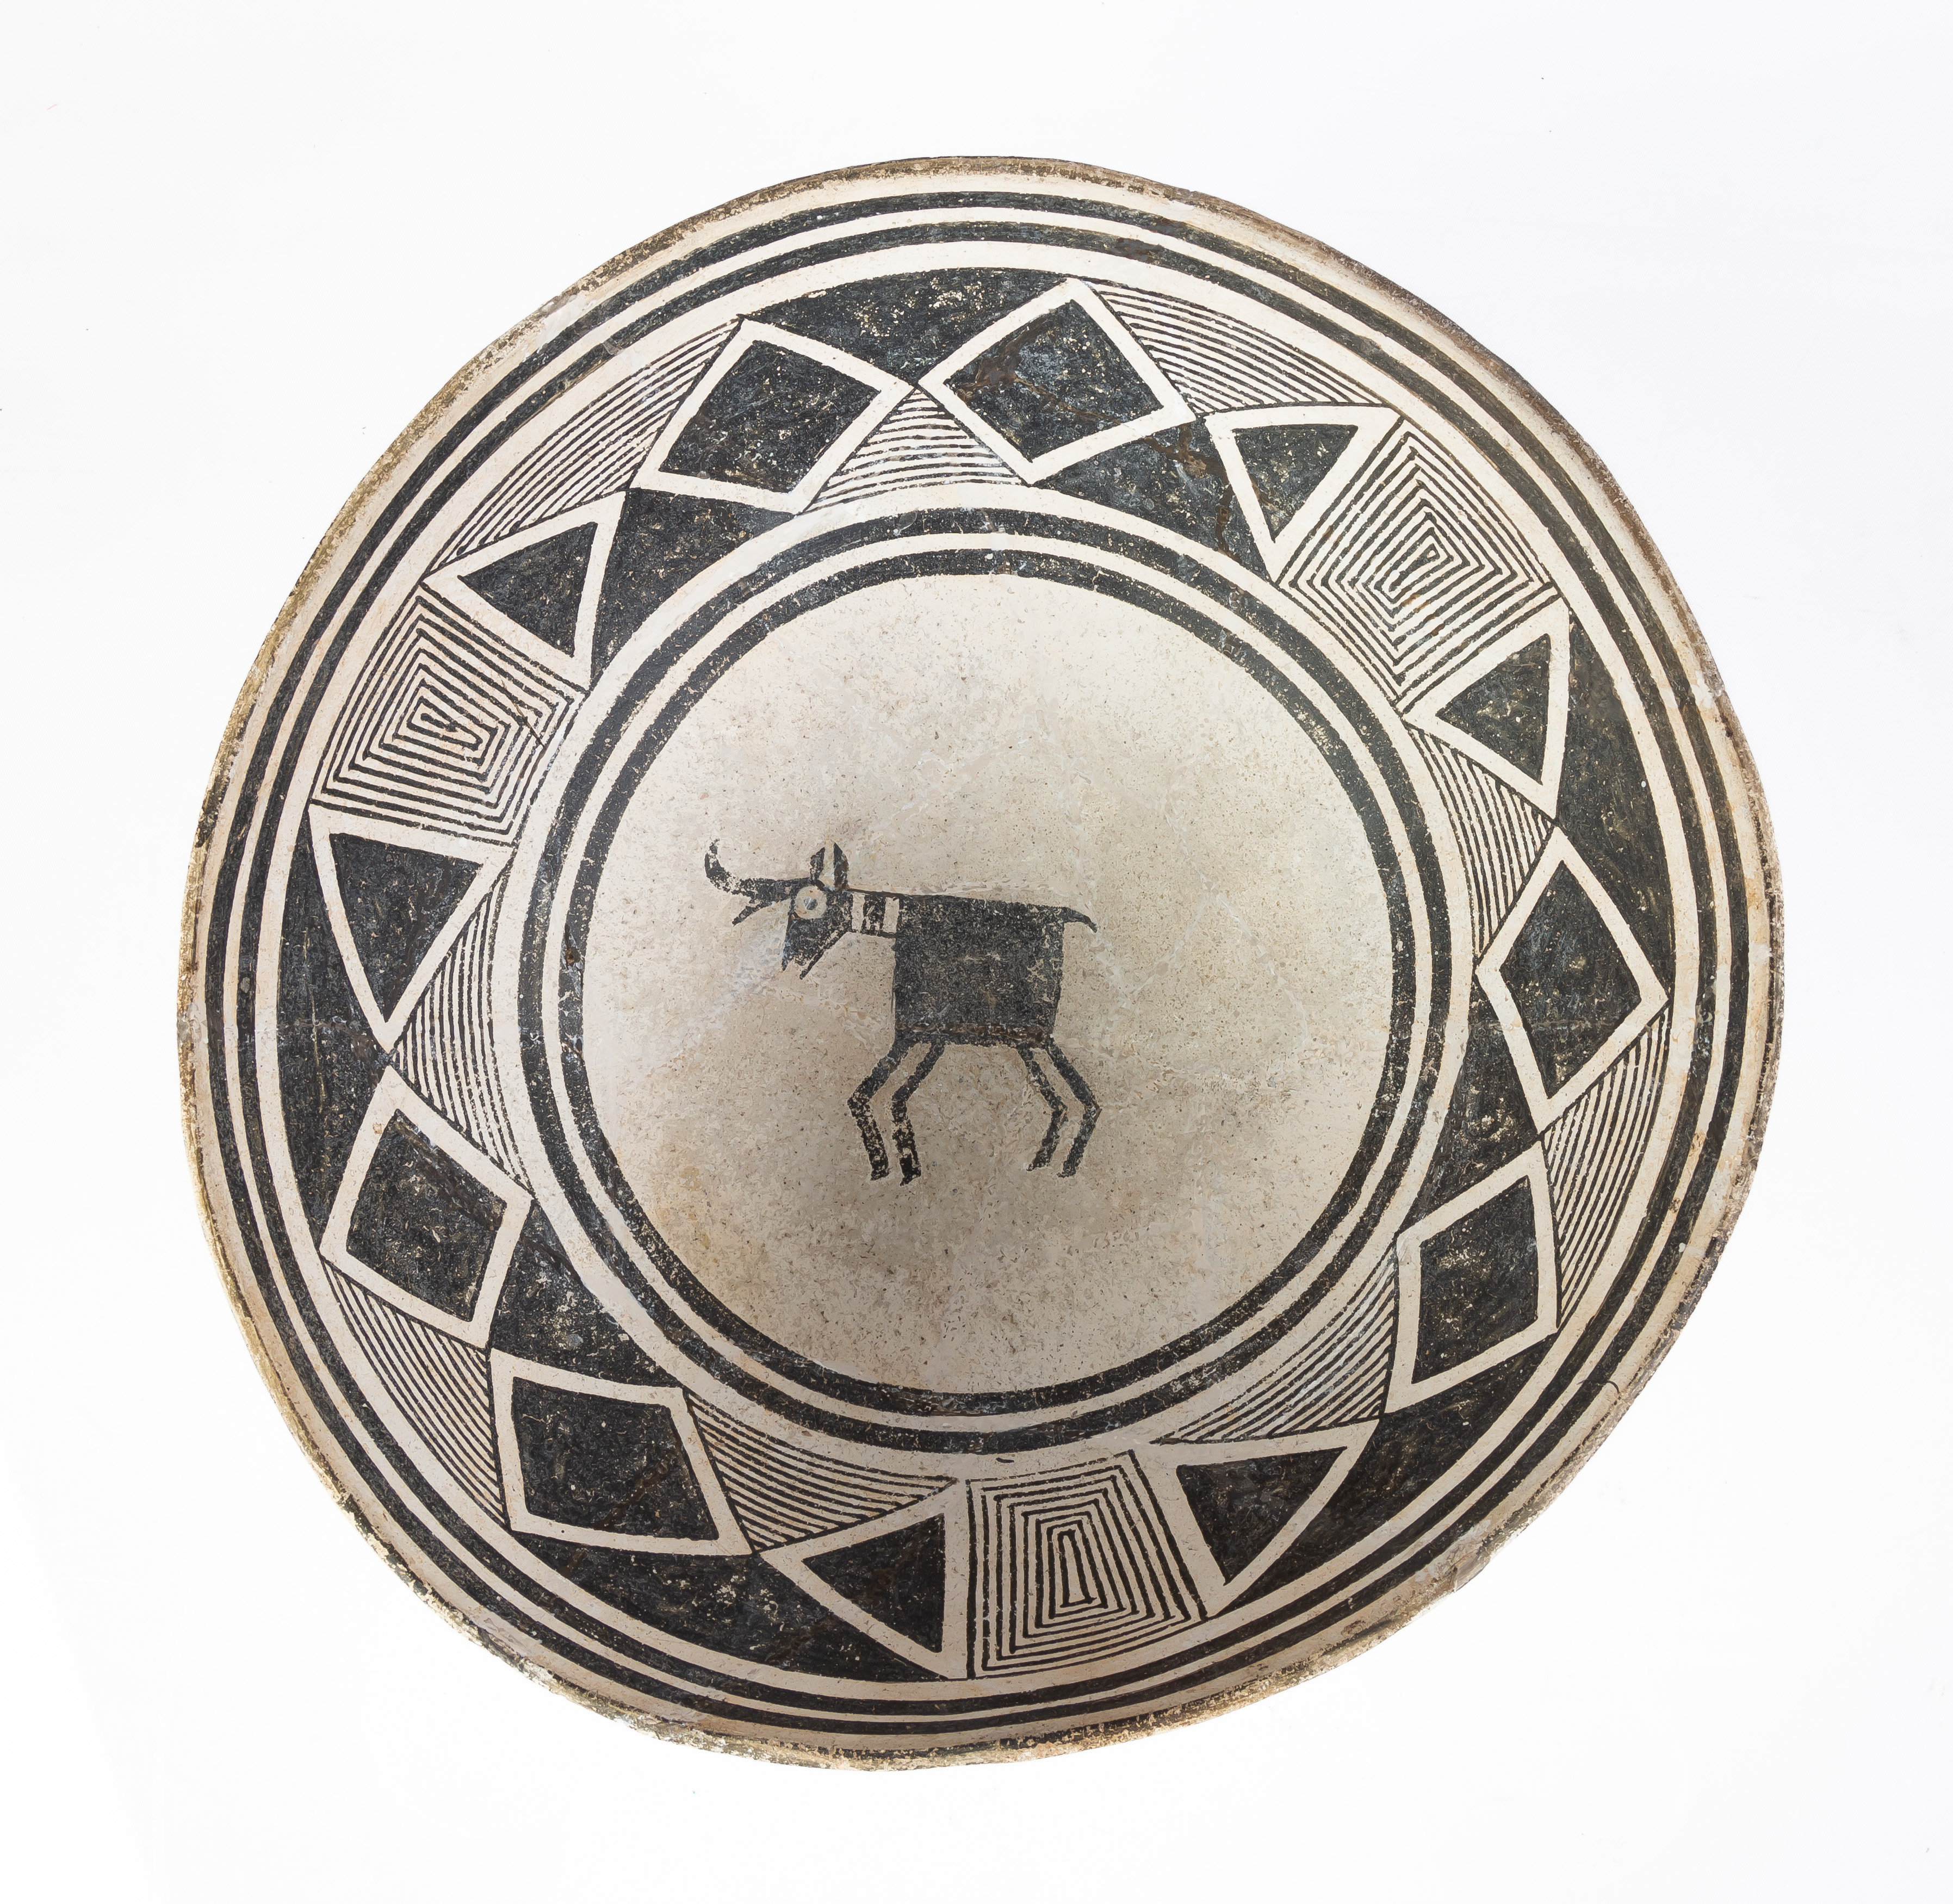 MIMBRES BOWL WITH ANTELOPE Mimbres 2f3707